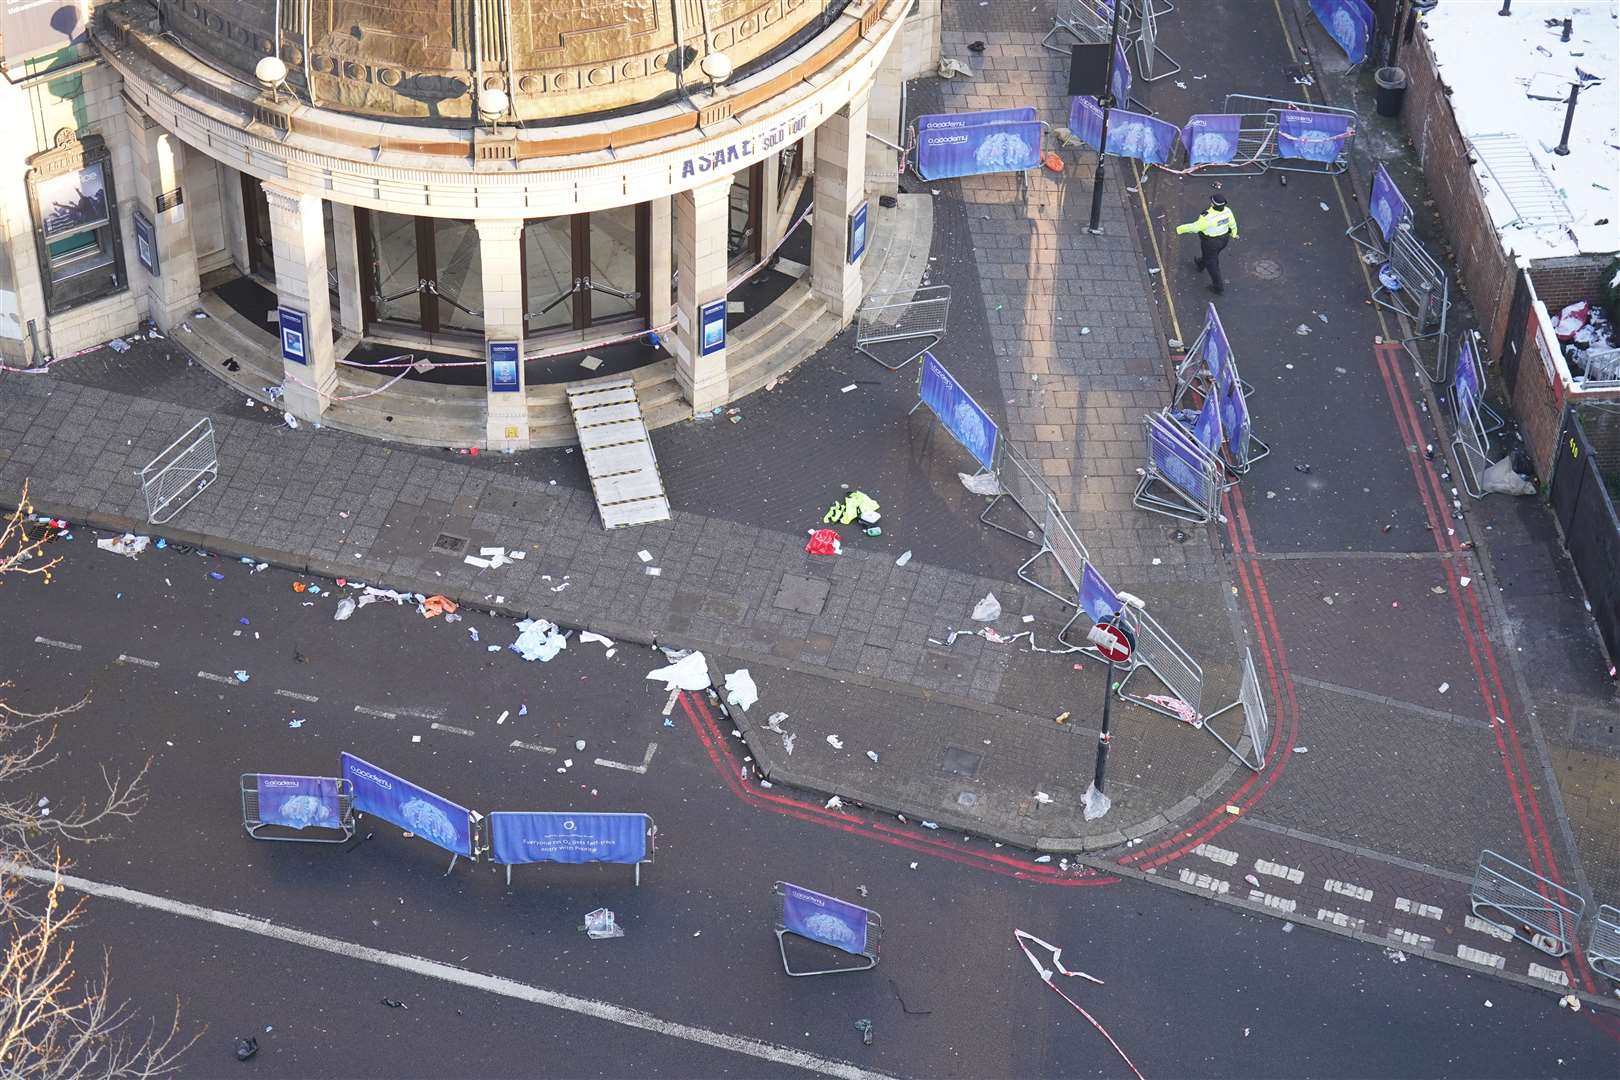 The scene outside the O2 Academy Brixton after four people suffered critical injuries in an apparent crush as a large crowd tried to force their way in (James Manning/PA)